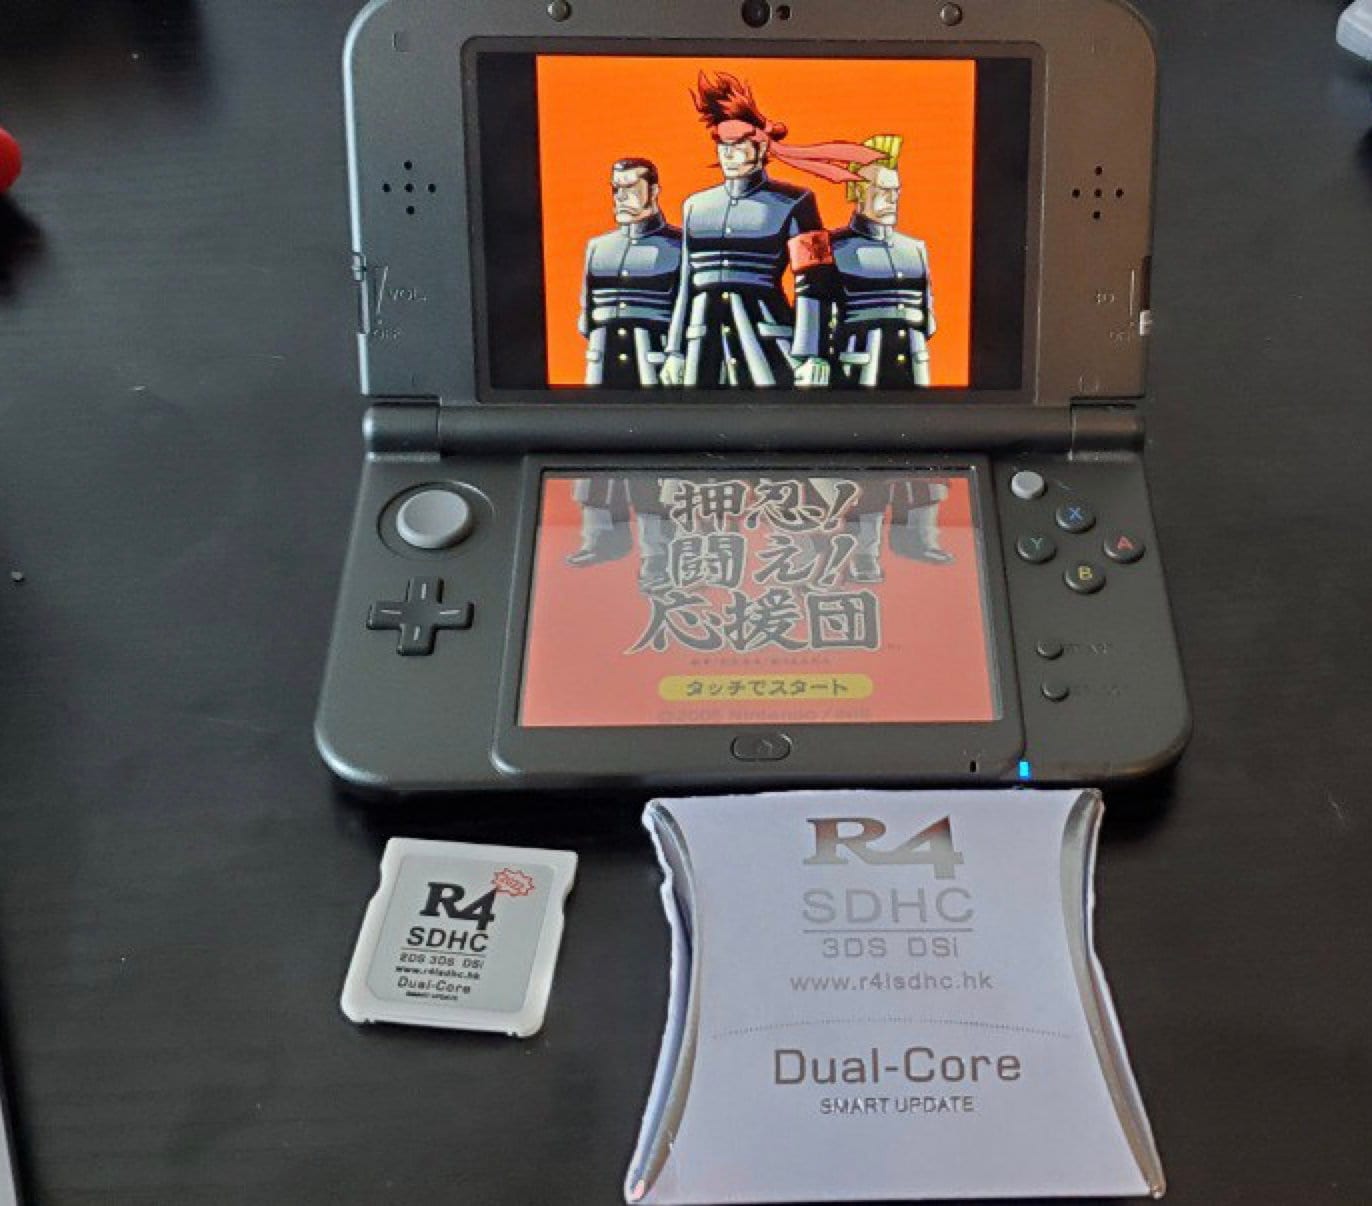 I can't run 3DS ROMs, only NDS! Help, please. : r/flashcarts